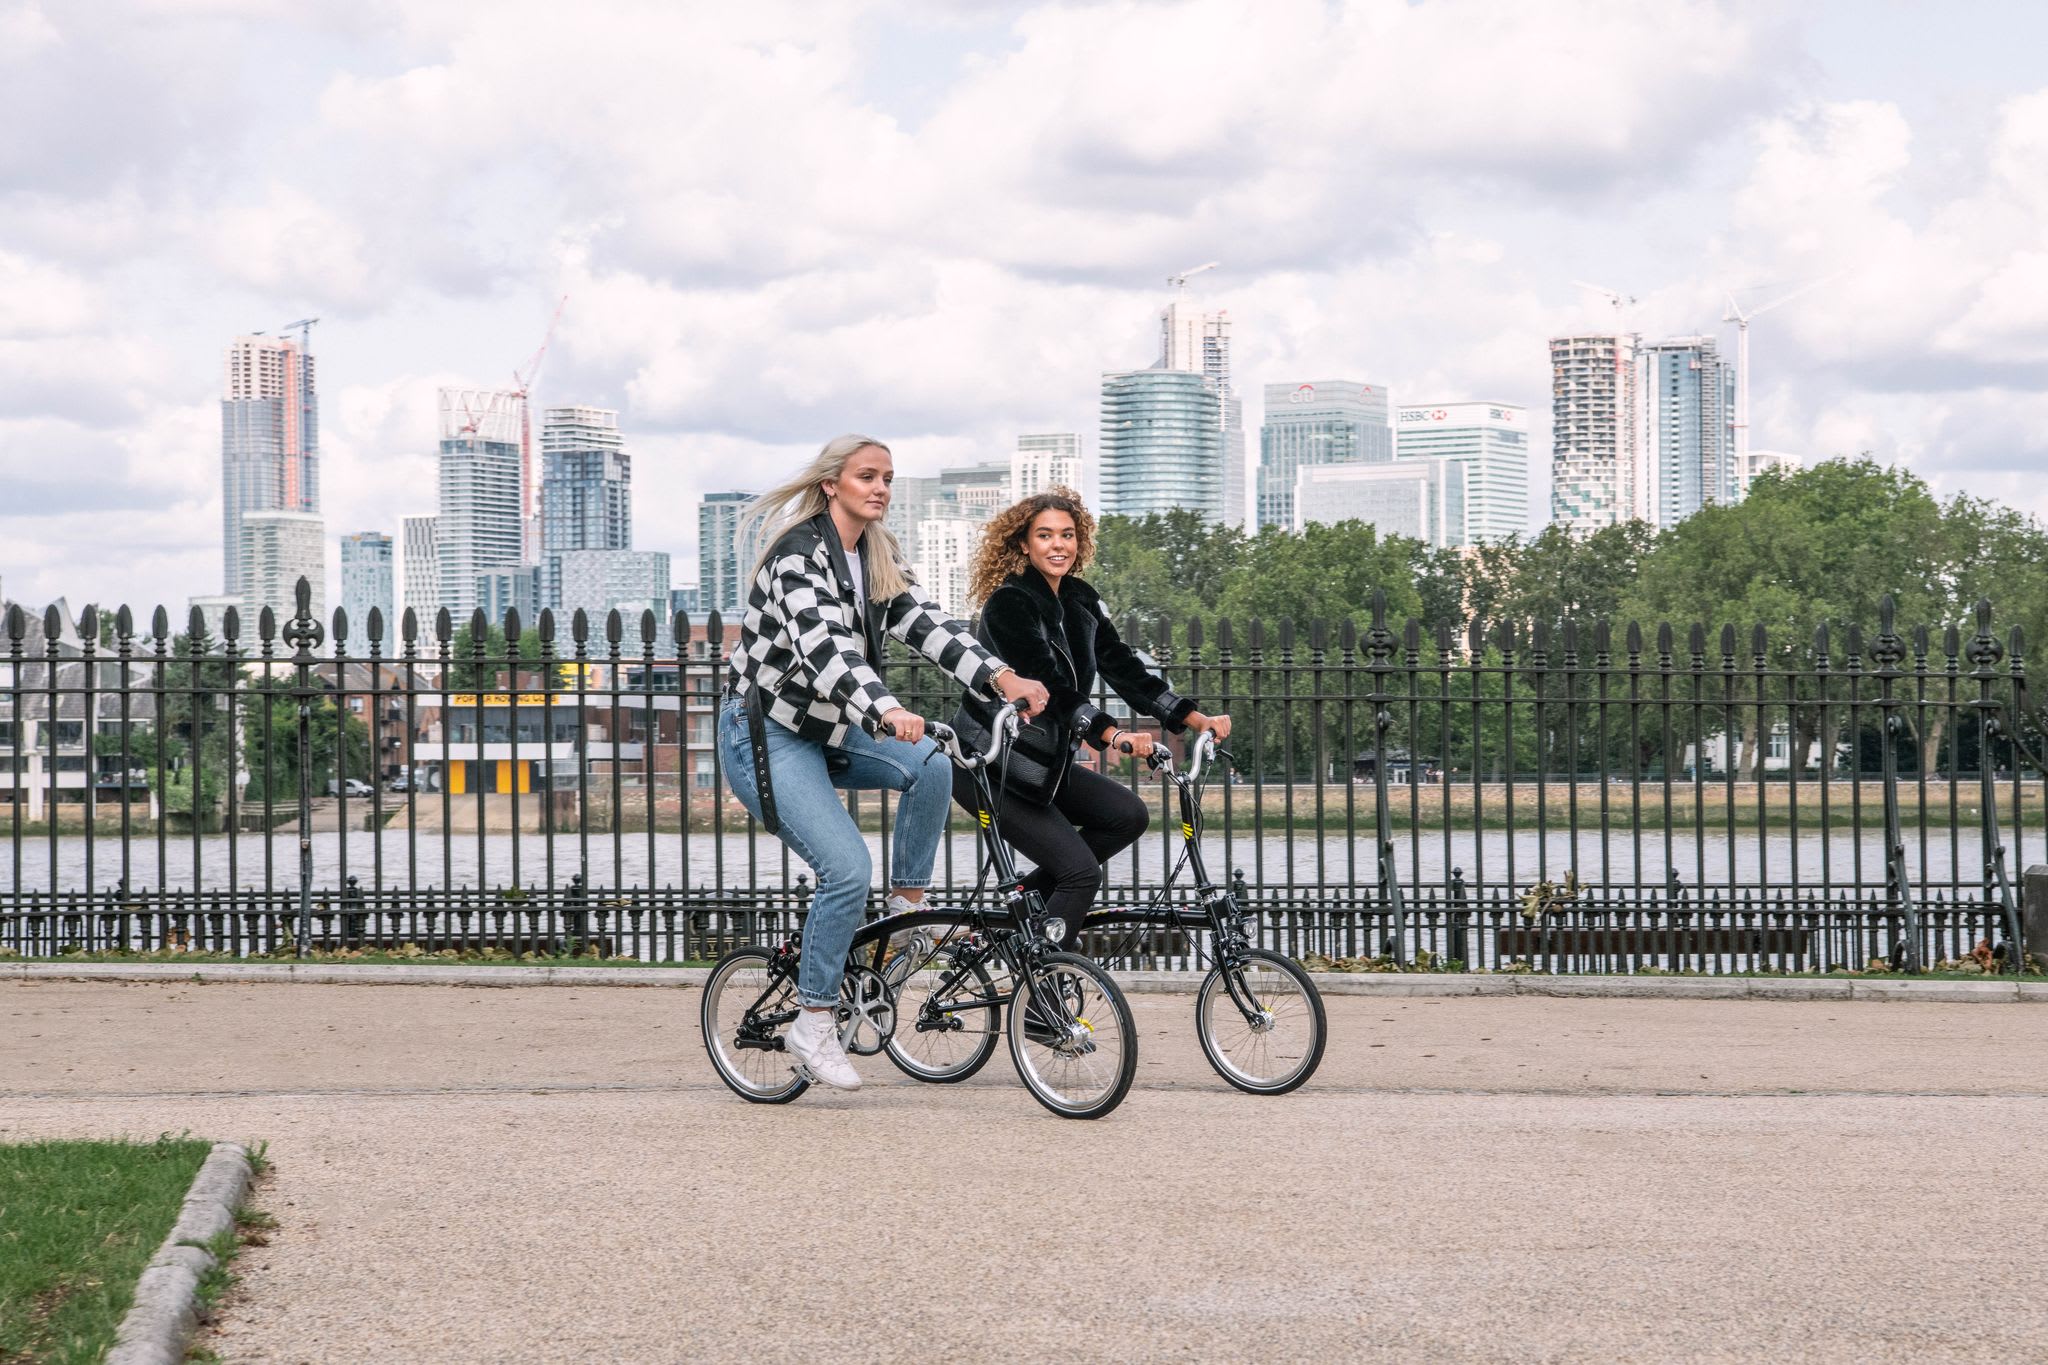 British foldable bike maker plans to launch subscription service next month as the cycling boom continues